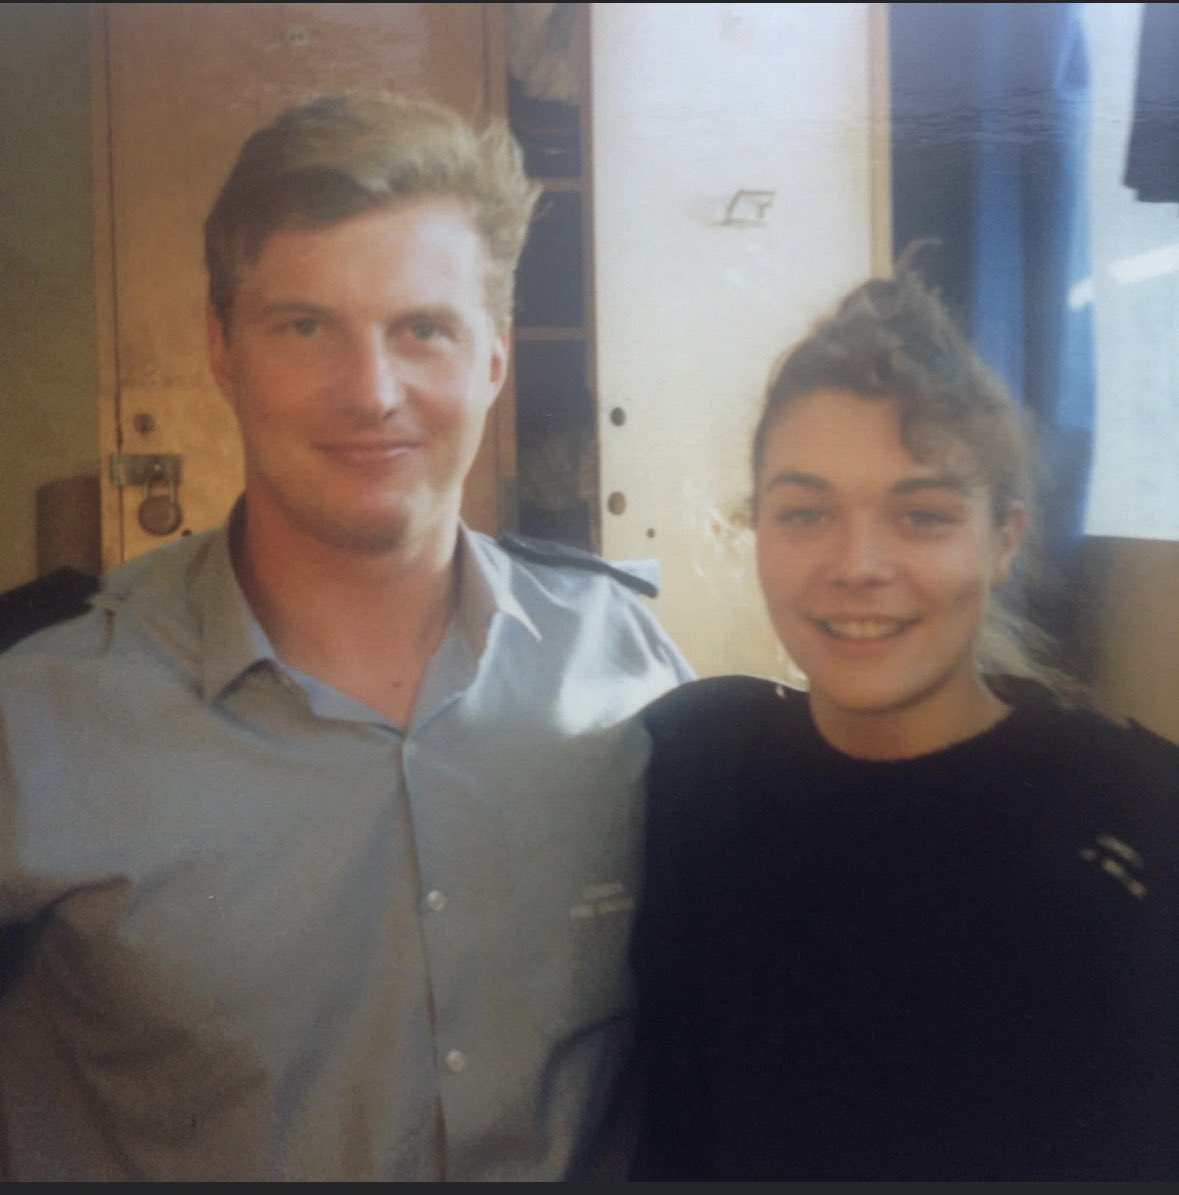 @beckinsale_sam @TVFilmPodcastUK @MistyMoonEvents @NorthySteve @E44Blackwall @bringbackLB @BStudios100 @FLFBM2022 @BrigadeMuseum Hi Sam, found this picture on the Shoreditch Fire Station Facebook site which I belong to. Posted by Ian (with you in the picture). He was our Leading Fireman, possibly T/Sub Officer on the night 🧐. Hope it brings back good memories 🔥🚒